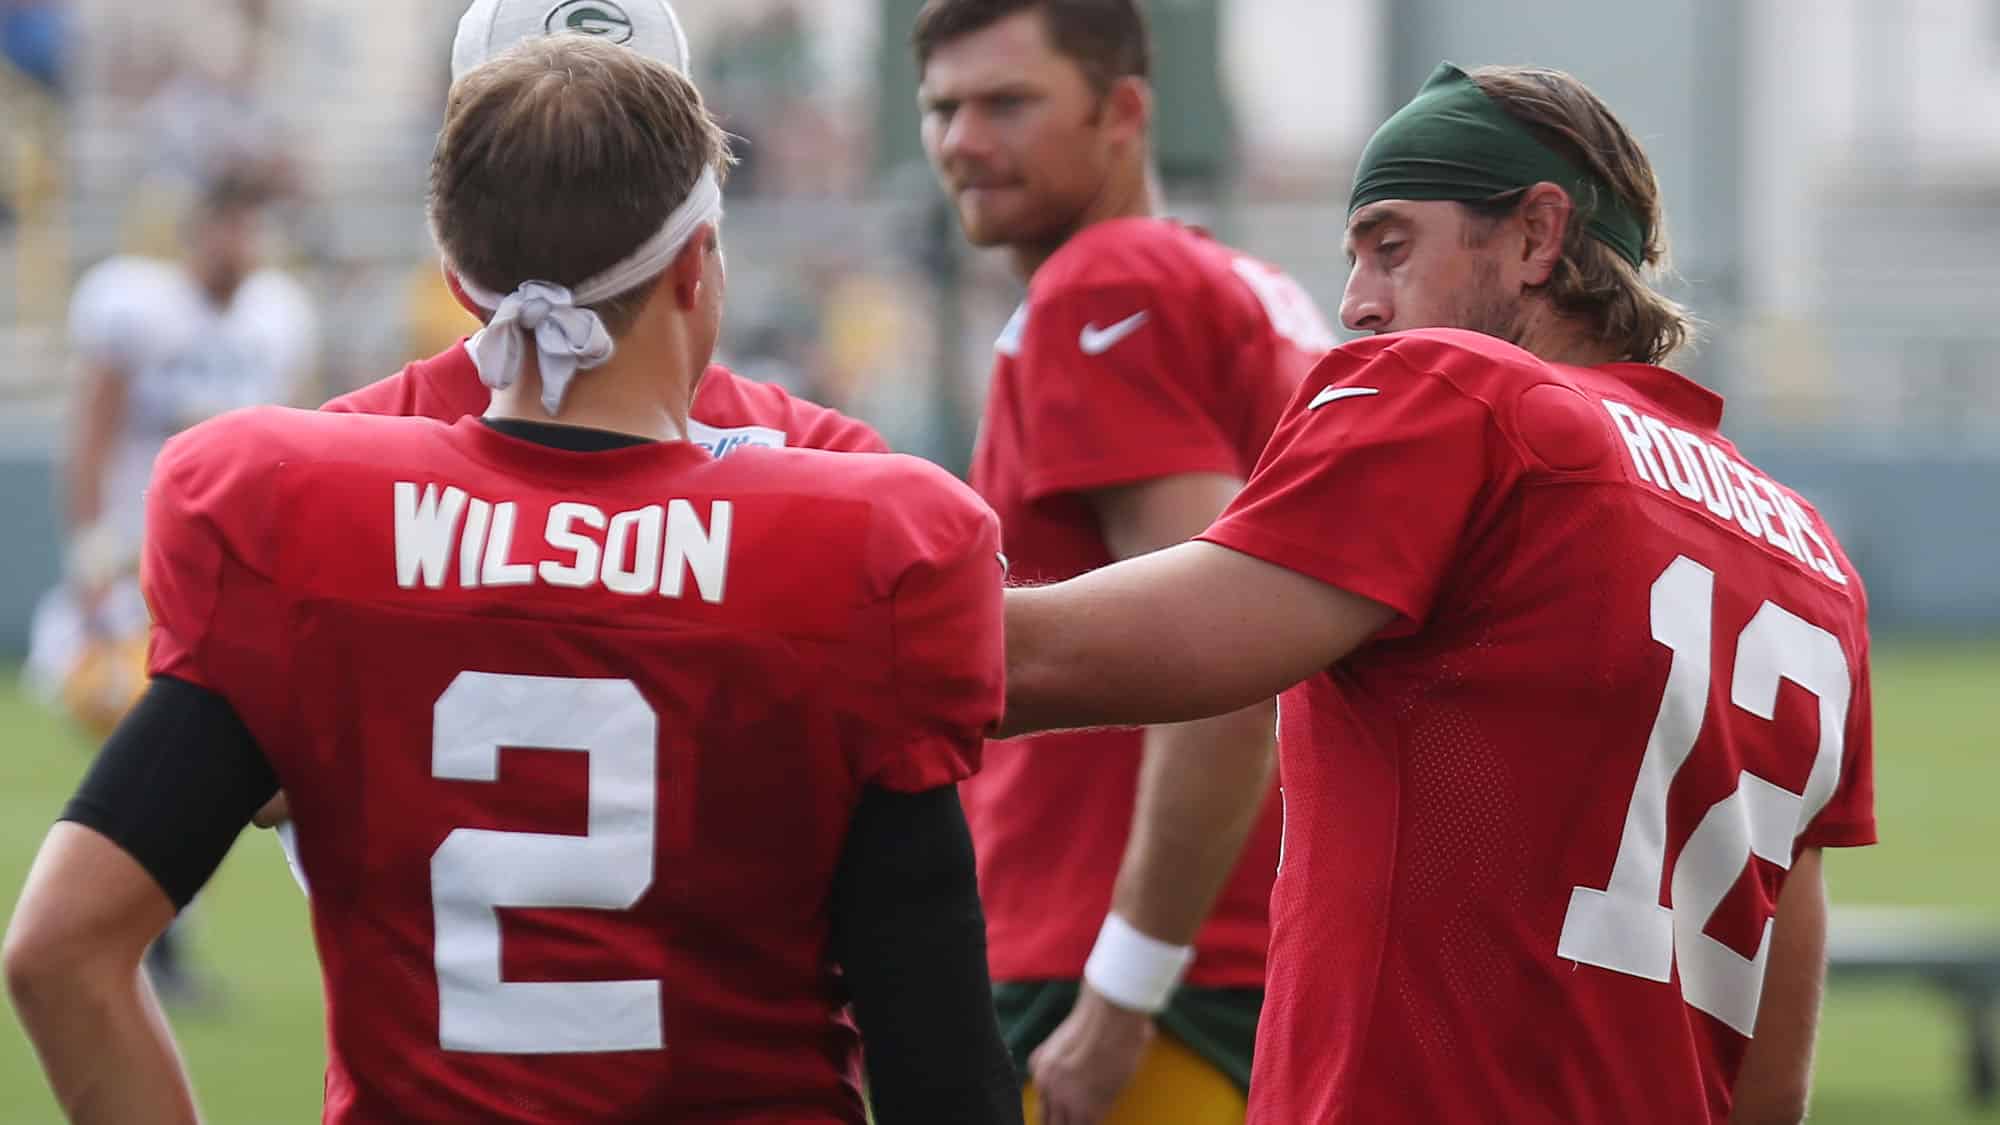 Zach Wilson talks to Aaron Rodgers ahead of a preseason game between the NY Jets and Green Bay Packers.